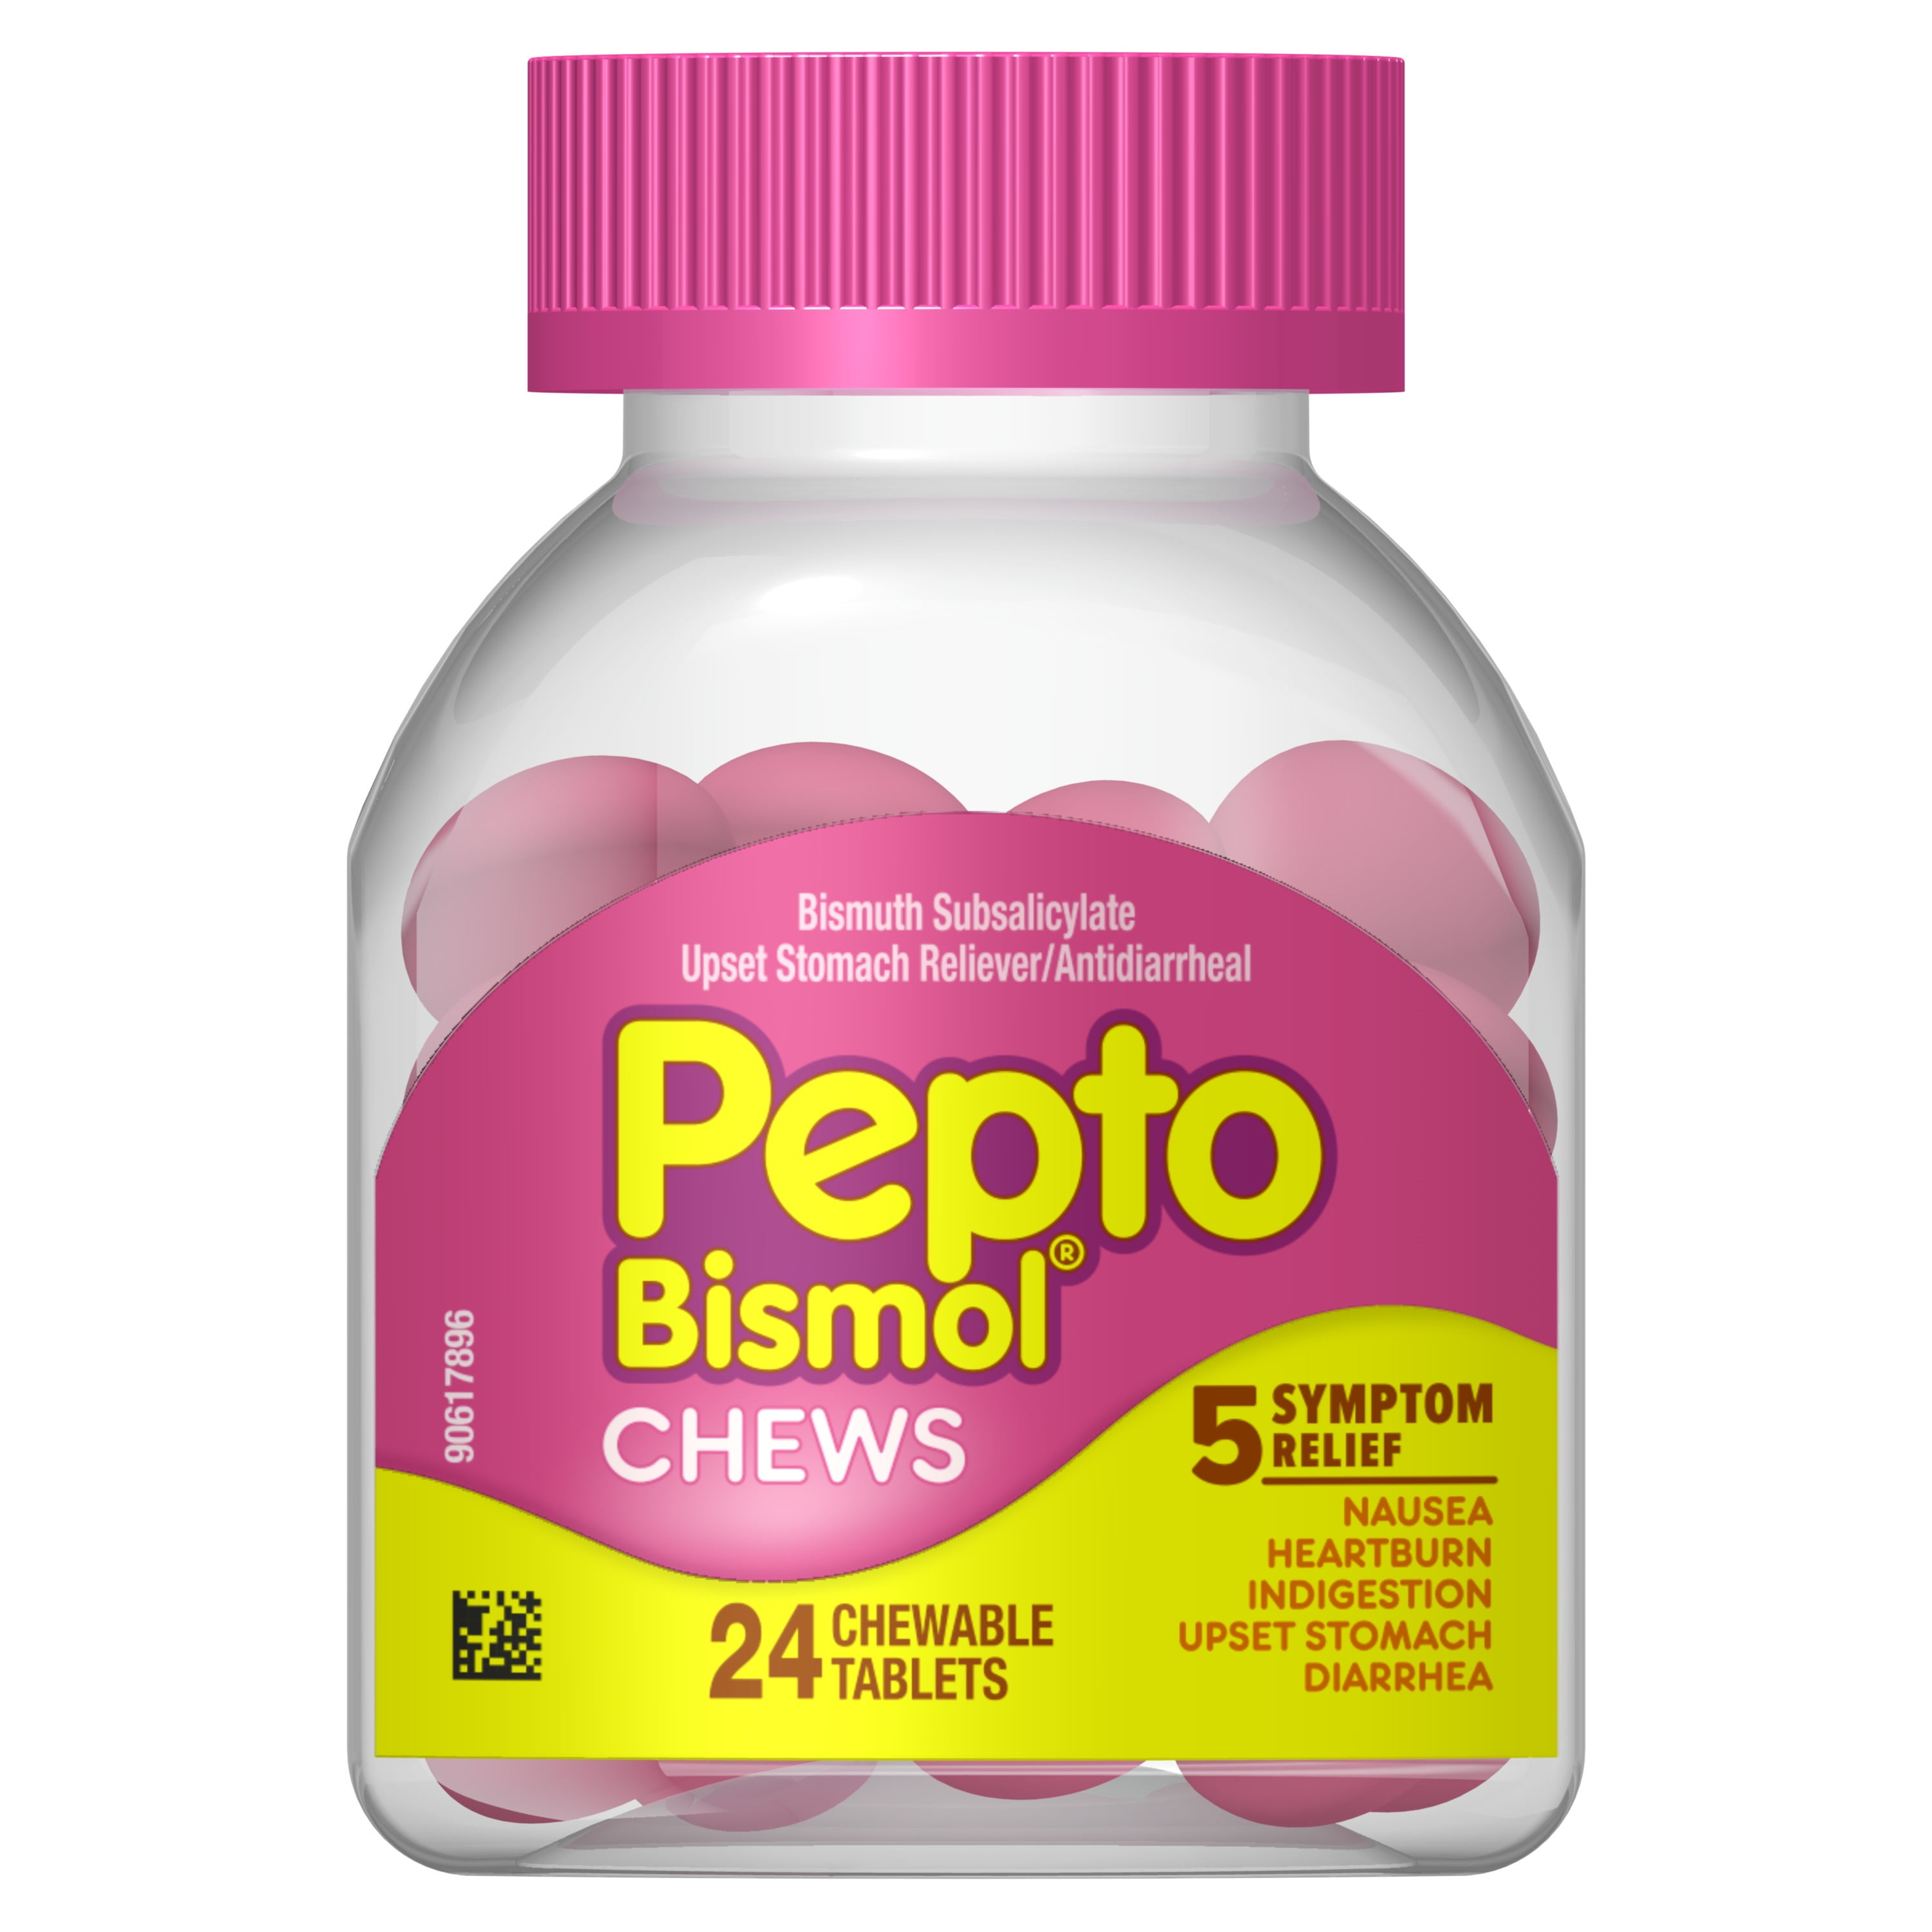 Pepto Bismol Chews, Fast and Effective Digestive Relief from Nausea, Heartburn, Indigestion, Upset Stomach, Diarrhea, 24 Chewable Tablets